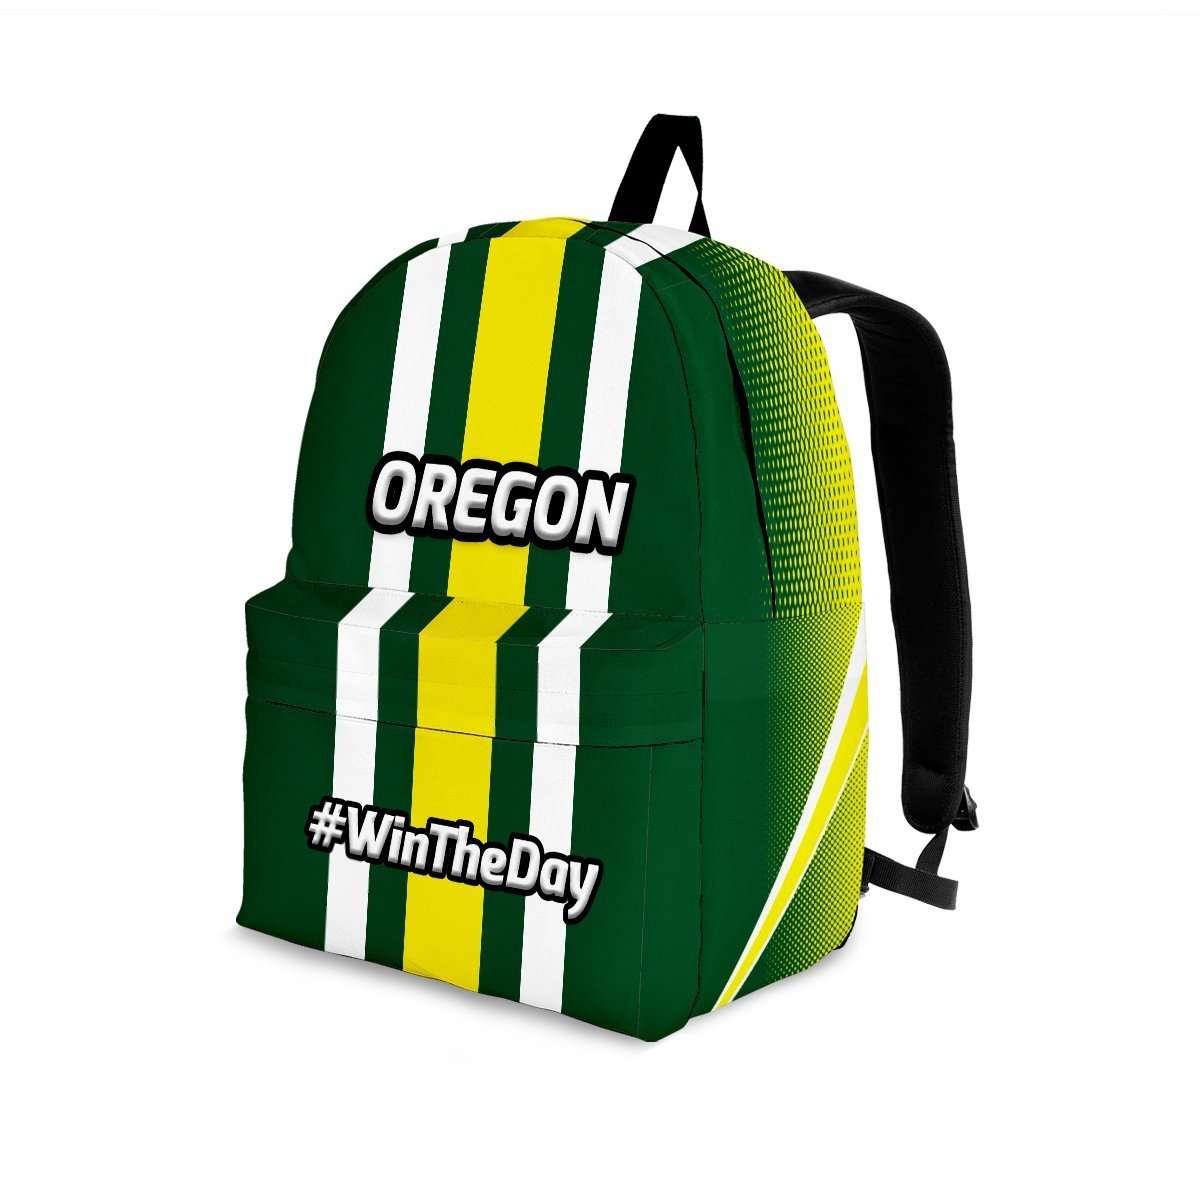 Designs by MyUtopia Shout Out:#WinTheDay Oregon Backpack,Large (18 x 14 x 8 inches) / Adult (Ages 13+) / Green,Backpacks